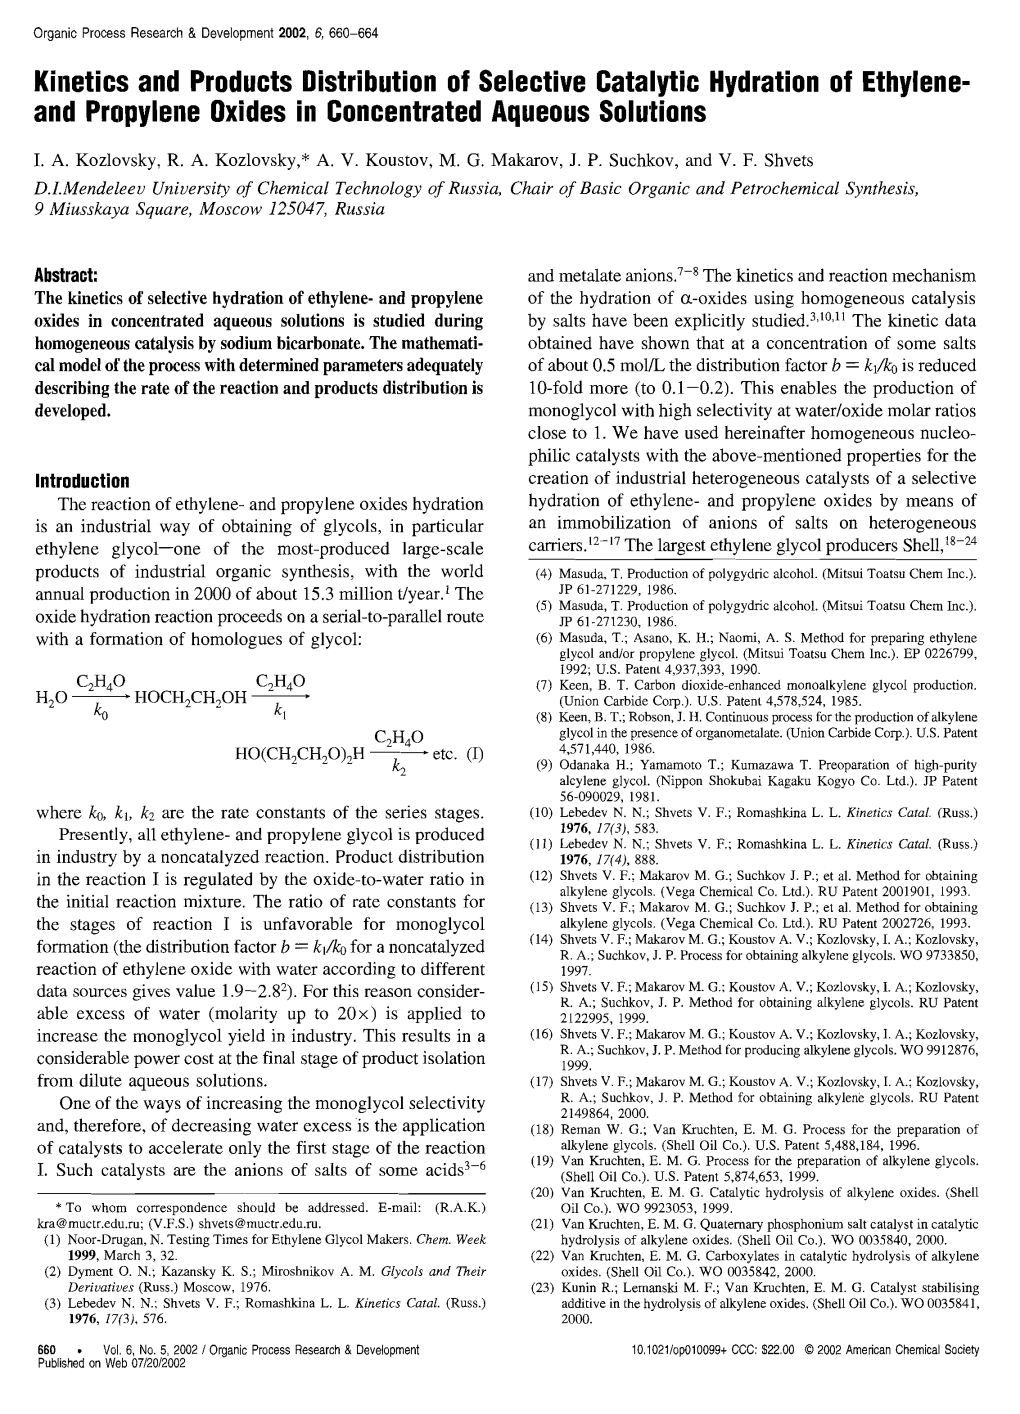 Kinetics and Products Distribution of Selective Catalytic Hydration of Ethylene­ and Propylene Oxides in Concentrated Aqueous Solutions